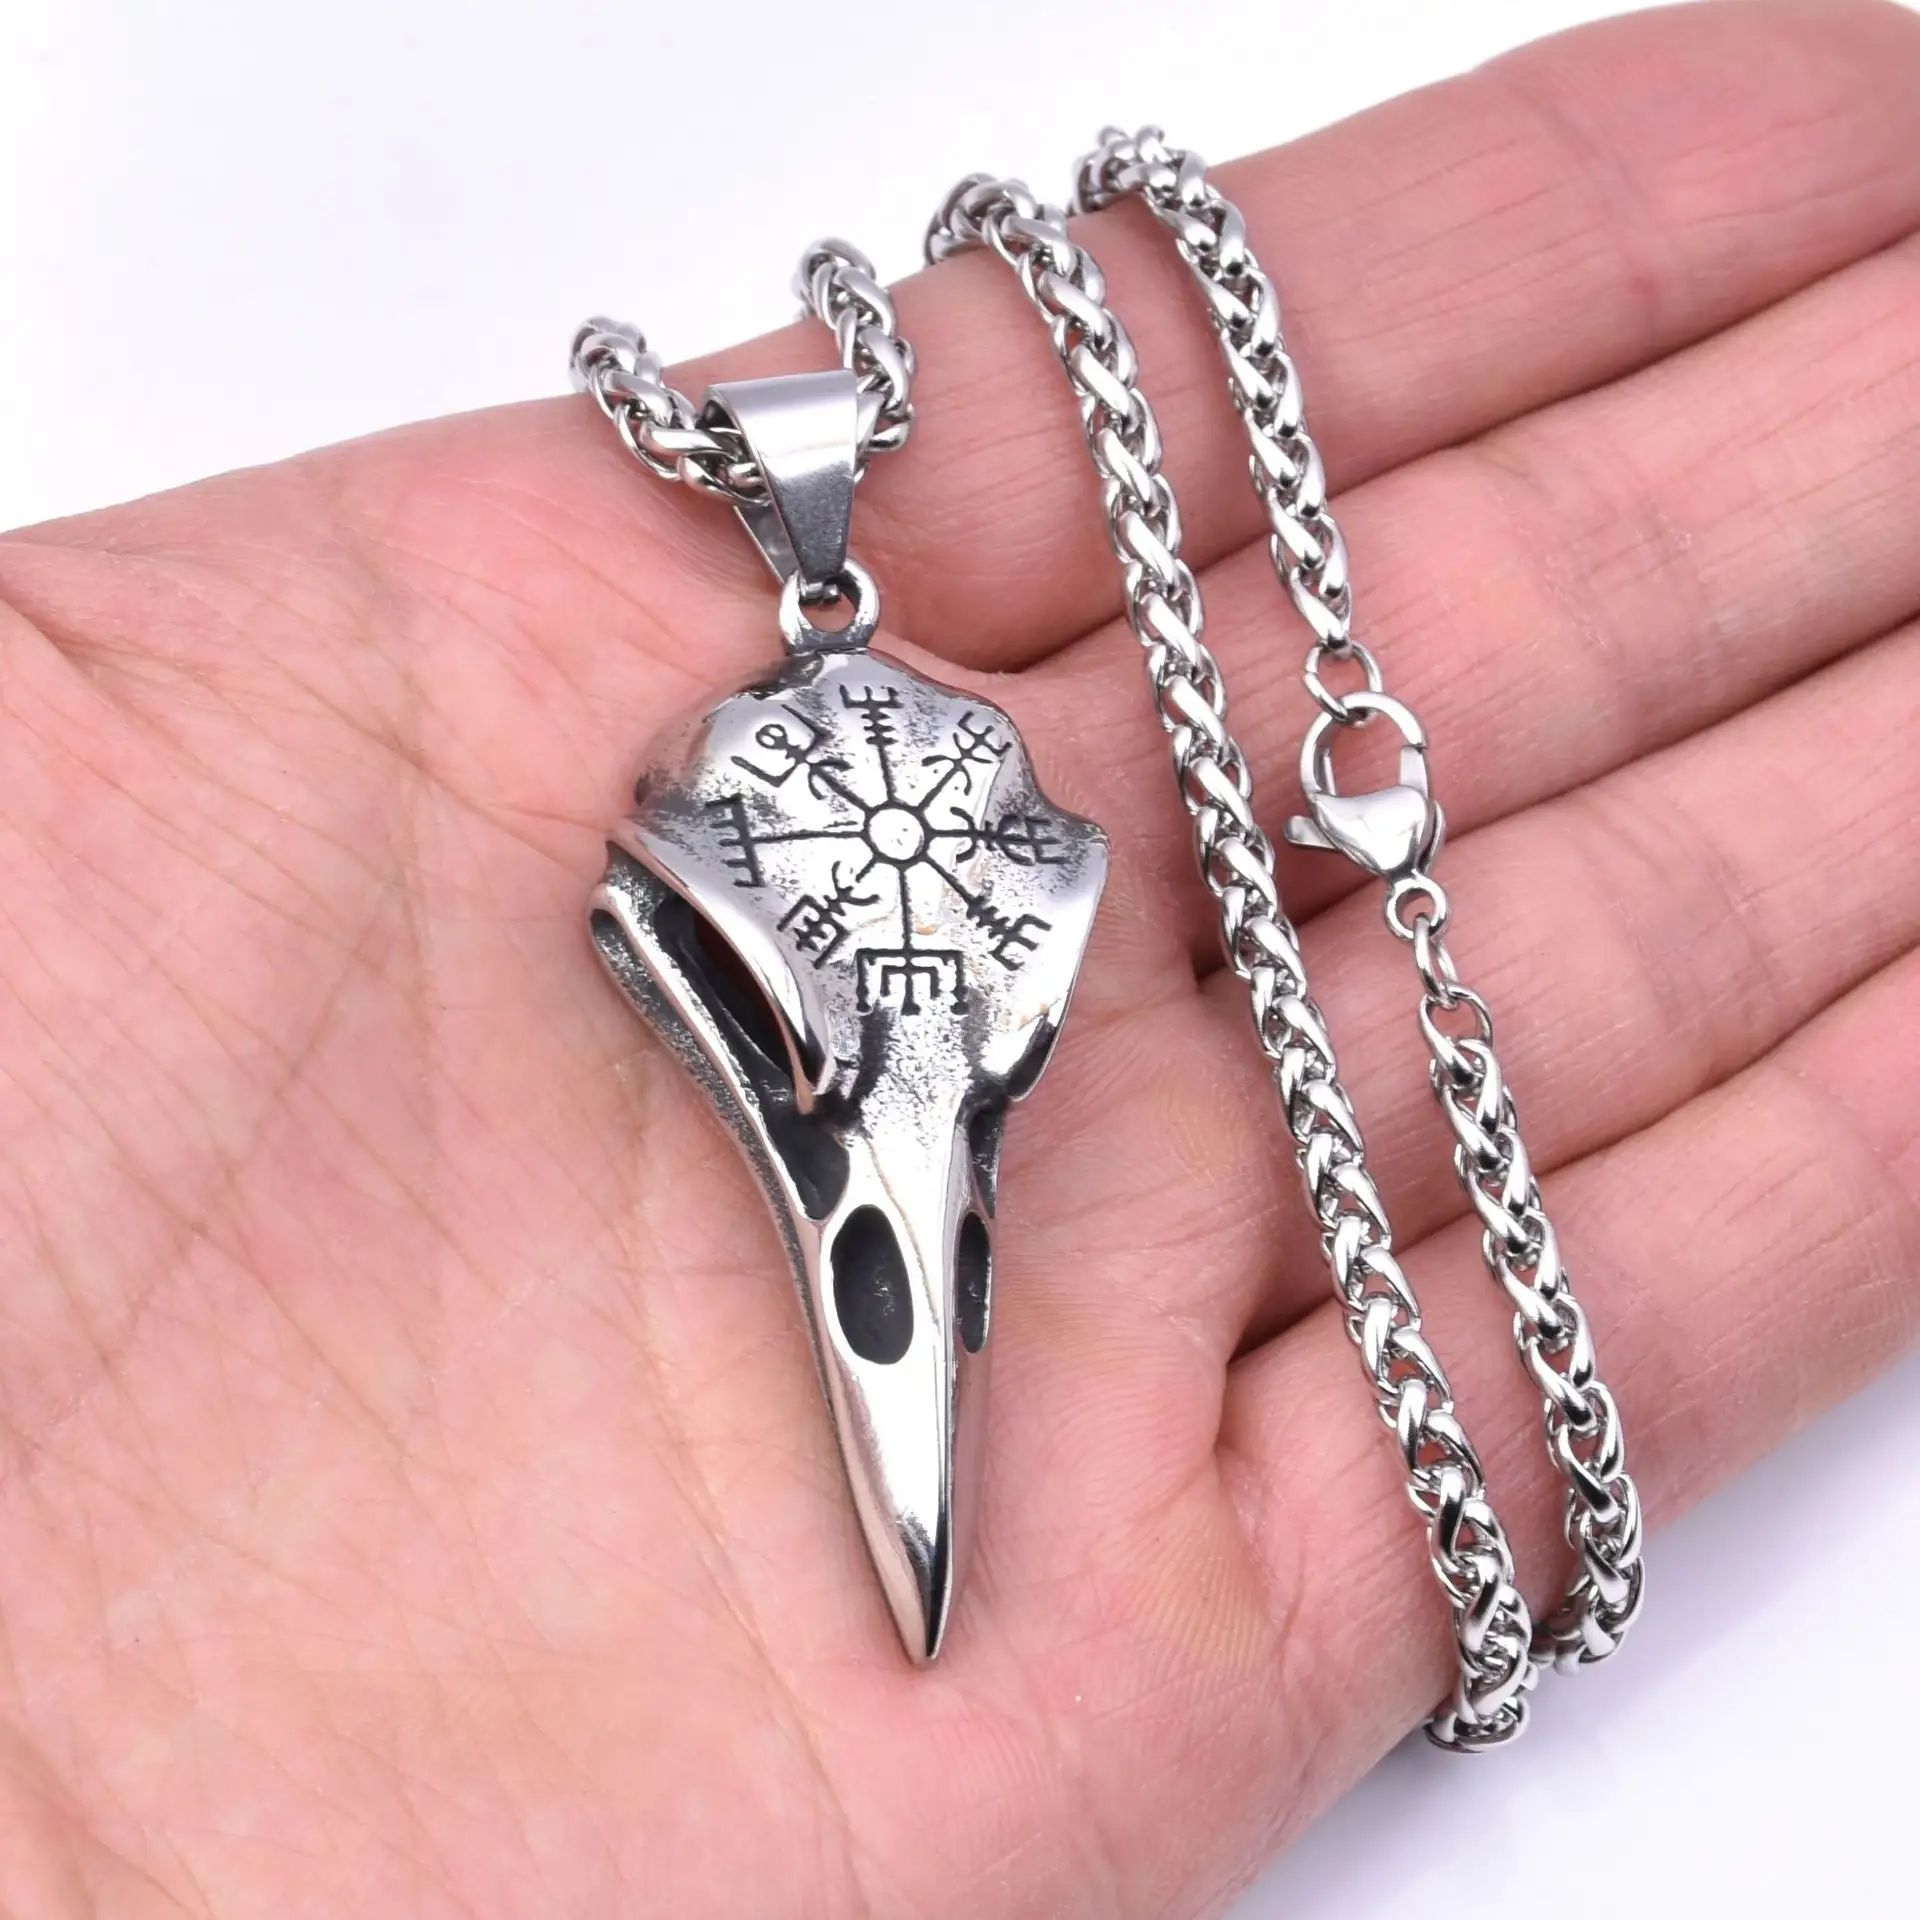 Wholesale Men's Summer New Stainless Steel Never Fade Nordic Viking Myth Crow Skull Rune Compass Pendant Necklace Jewelry